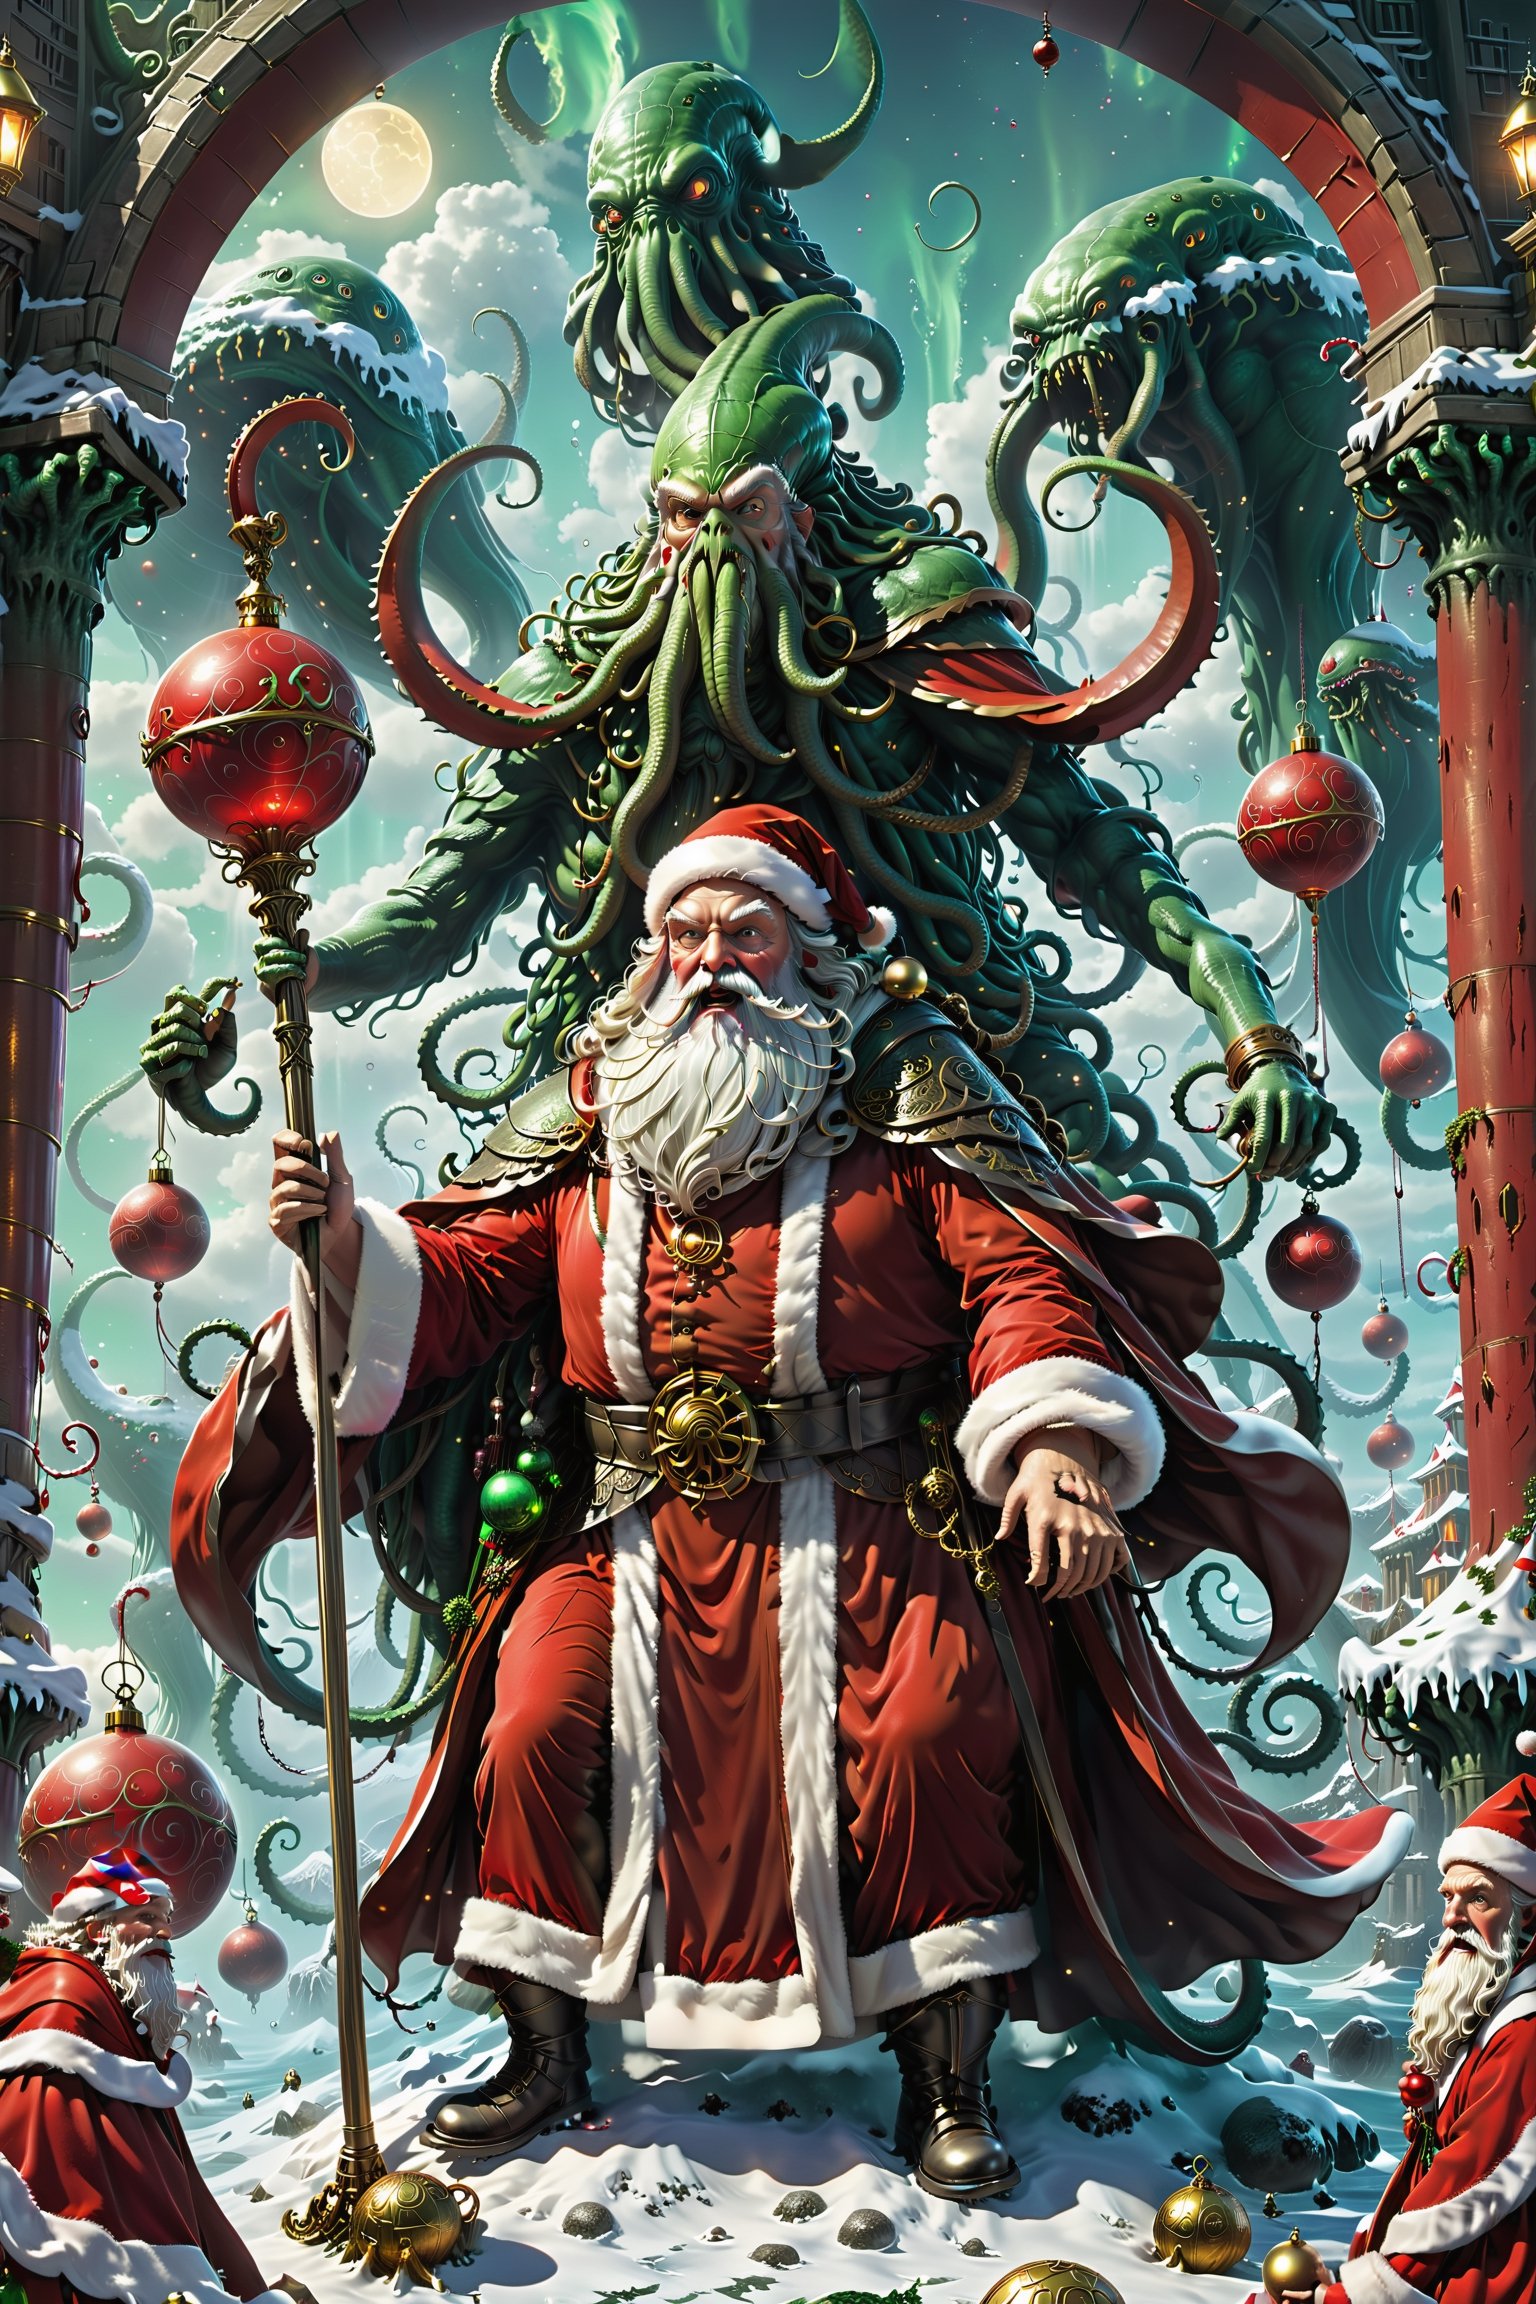 In this fantastical and macabre scene, Santa Claus appears in a new guise as he rides atop the massive and mysterious Cthulhu Behemoth, presenting an incredible fusion of otherworldly and traditional Christmas.

The Cthulhu Behemoth is tall and grim, with a body covered in ancient scales and a mysterious gleam in its eyes. The Behemoth's tentacles might as well be adorned with some Christmas hangings, giving the whole scene a mysterious sense of horror.

Santa Claus is dressed in a black and red Christmas robe, wearing a white Santa hat and holding a gilded whip in his hand, as if he is guiding the Cthulhu Behemoth forward. His eyes are both solemn and mysterious, and he seems to be conveying an unusual blessing.

Some strange light and shadow may pervade the surroundings, emphasizing the supernatural qualities of the scene. Perhaps there are also some magical circles or runes floating in the air, adding color to this whimsical image.

The whole image is full of imagination, and the combination of Santa Claus and the Cthulhu Behemoth presents a mysterious and scary fantasy atmosphere, giving an unforgettable visual impact.